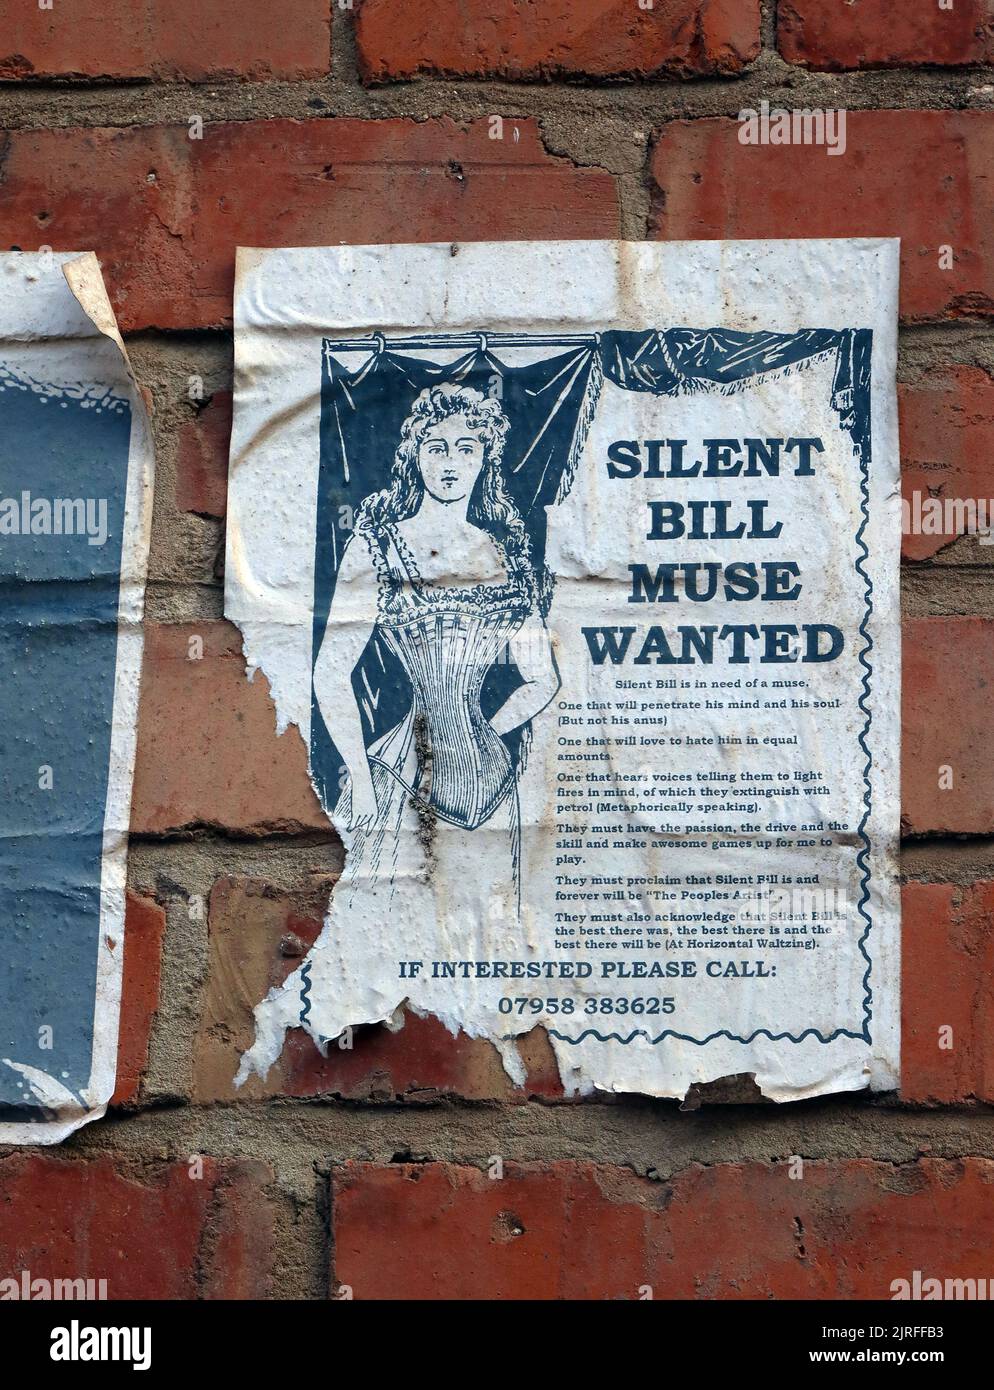 Silent Bill Muse, wanted - 07958-383625, Deansgate, Blackpool , Lancs, England, FY1 1BN Stock Photo